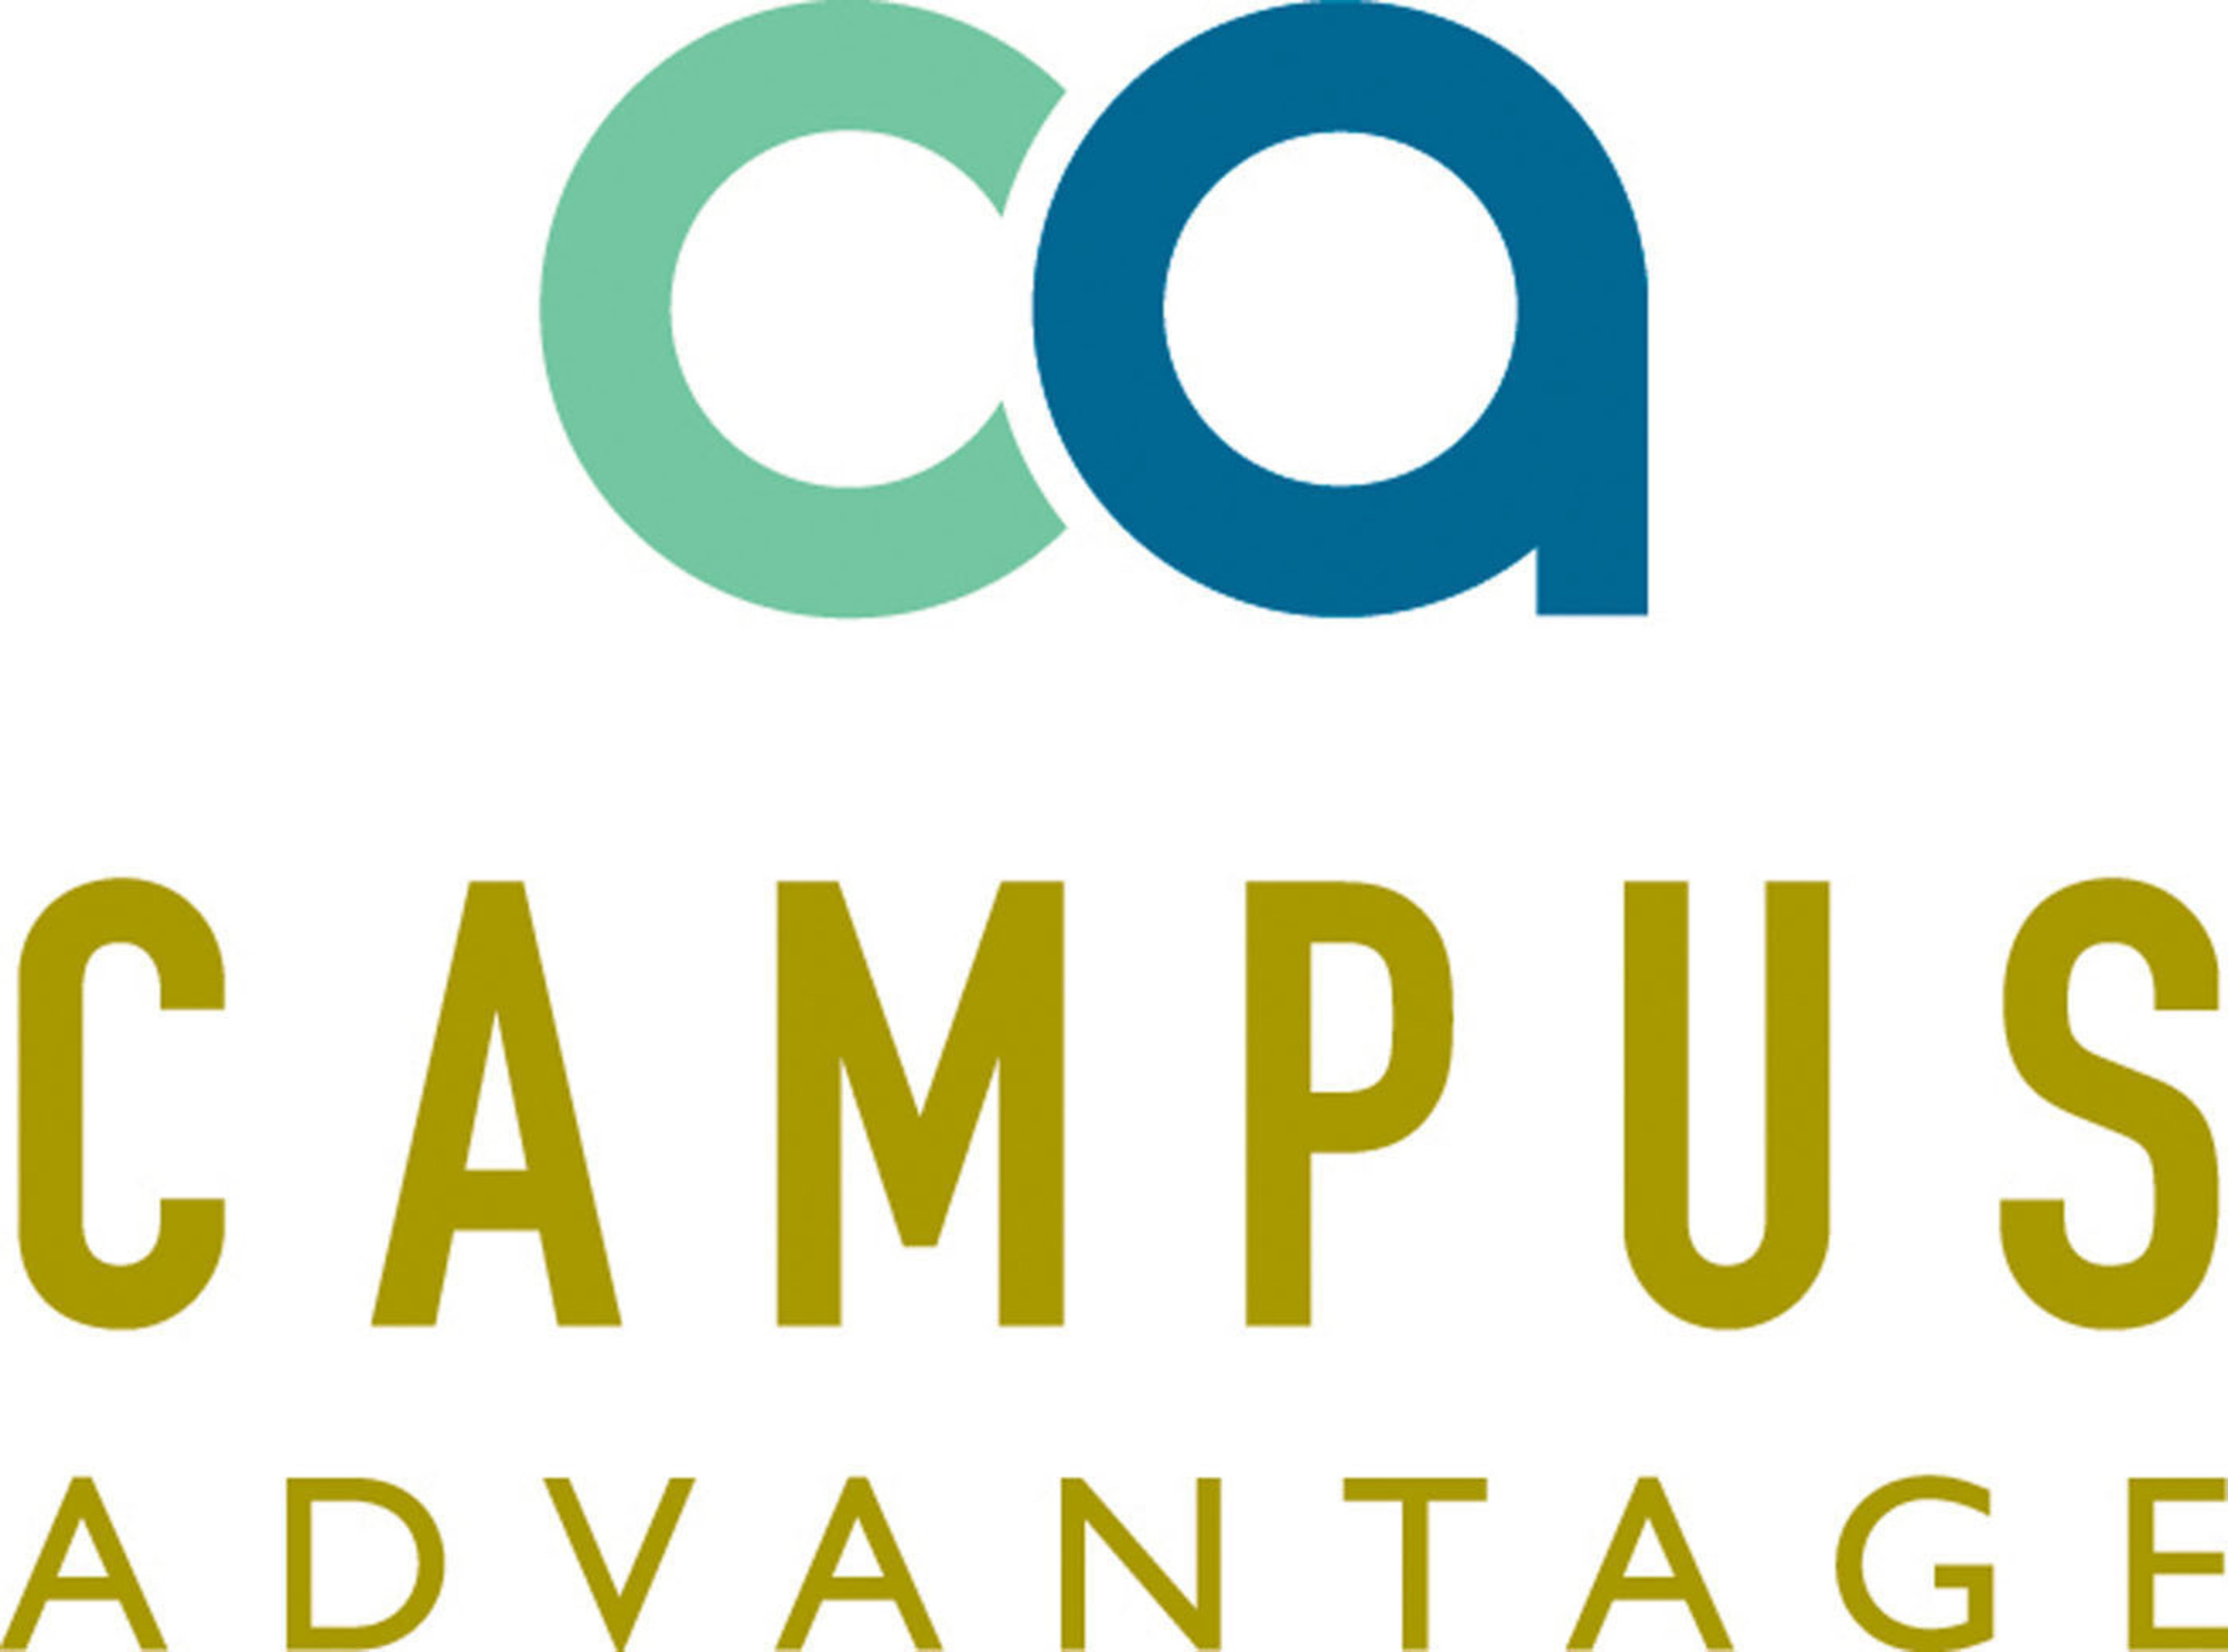 Campus Advantage, a leading student housing and higher education services company. (PRNewsFoto/Campus Advantage) (PRNewsFoto/)